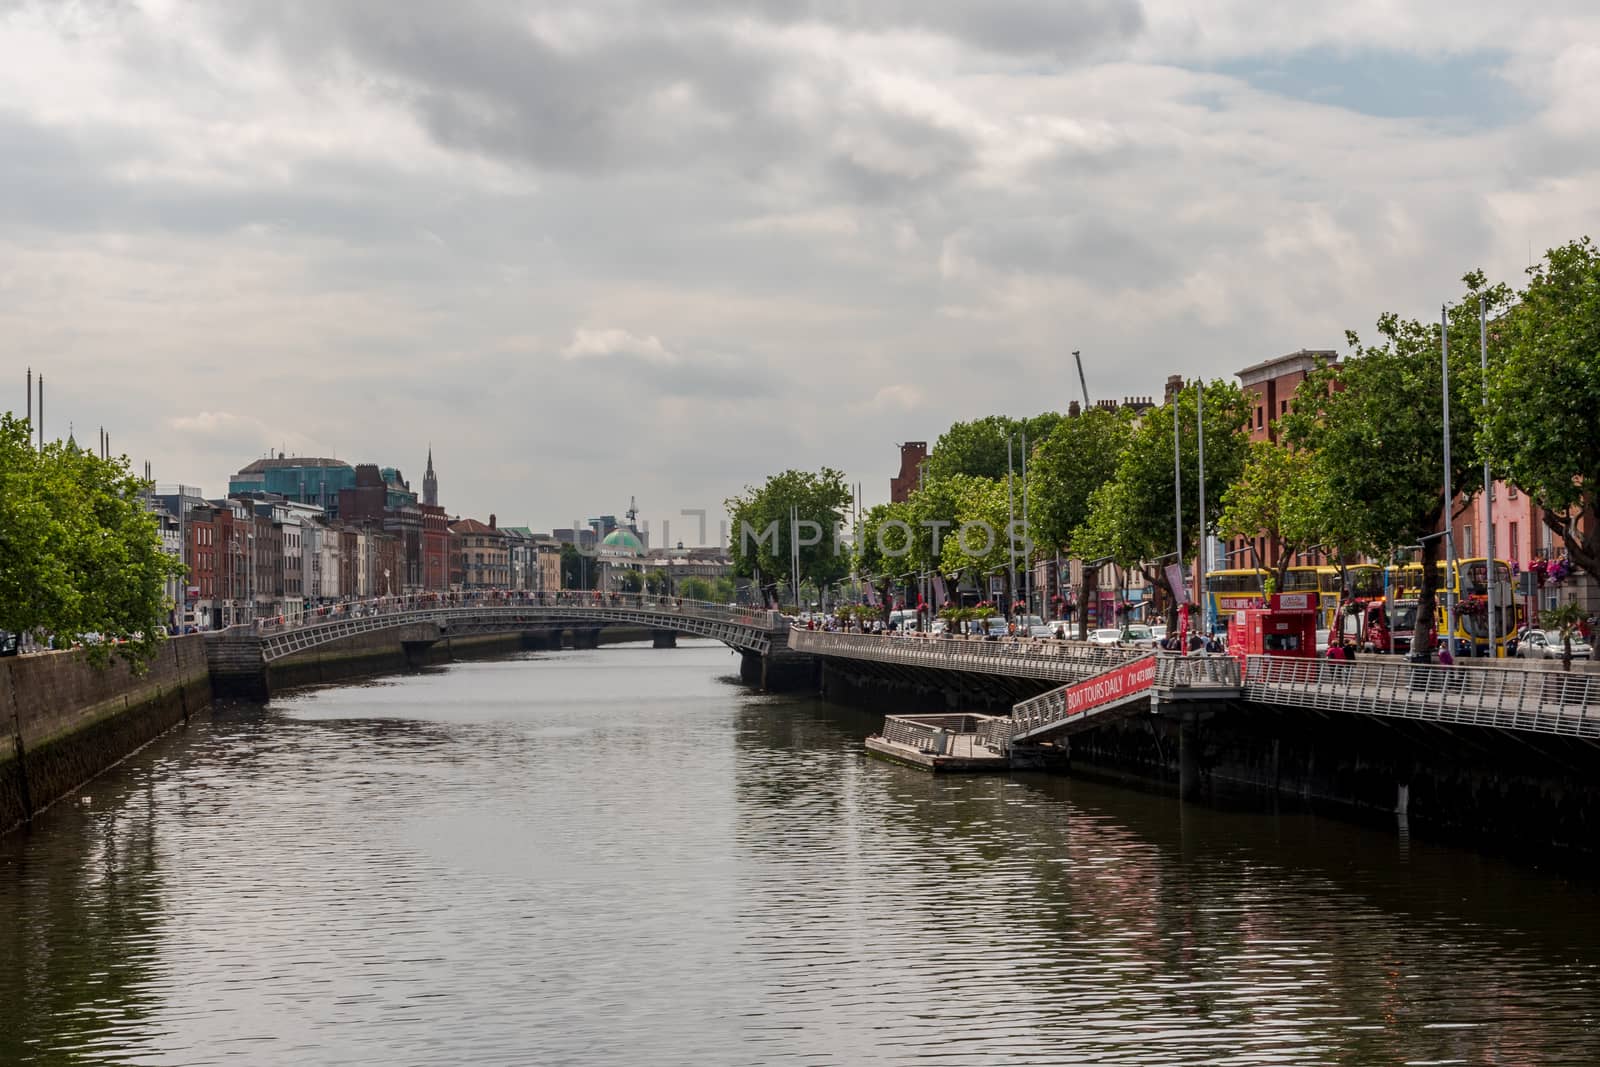 Banks of the River Liffey by jfbenning